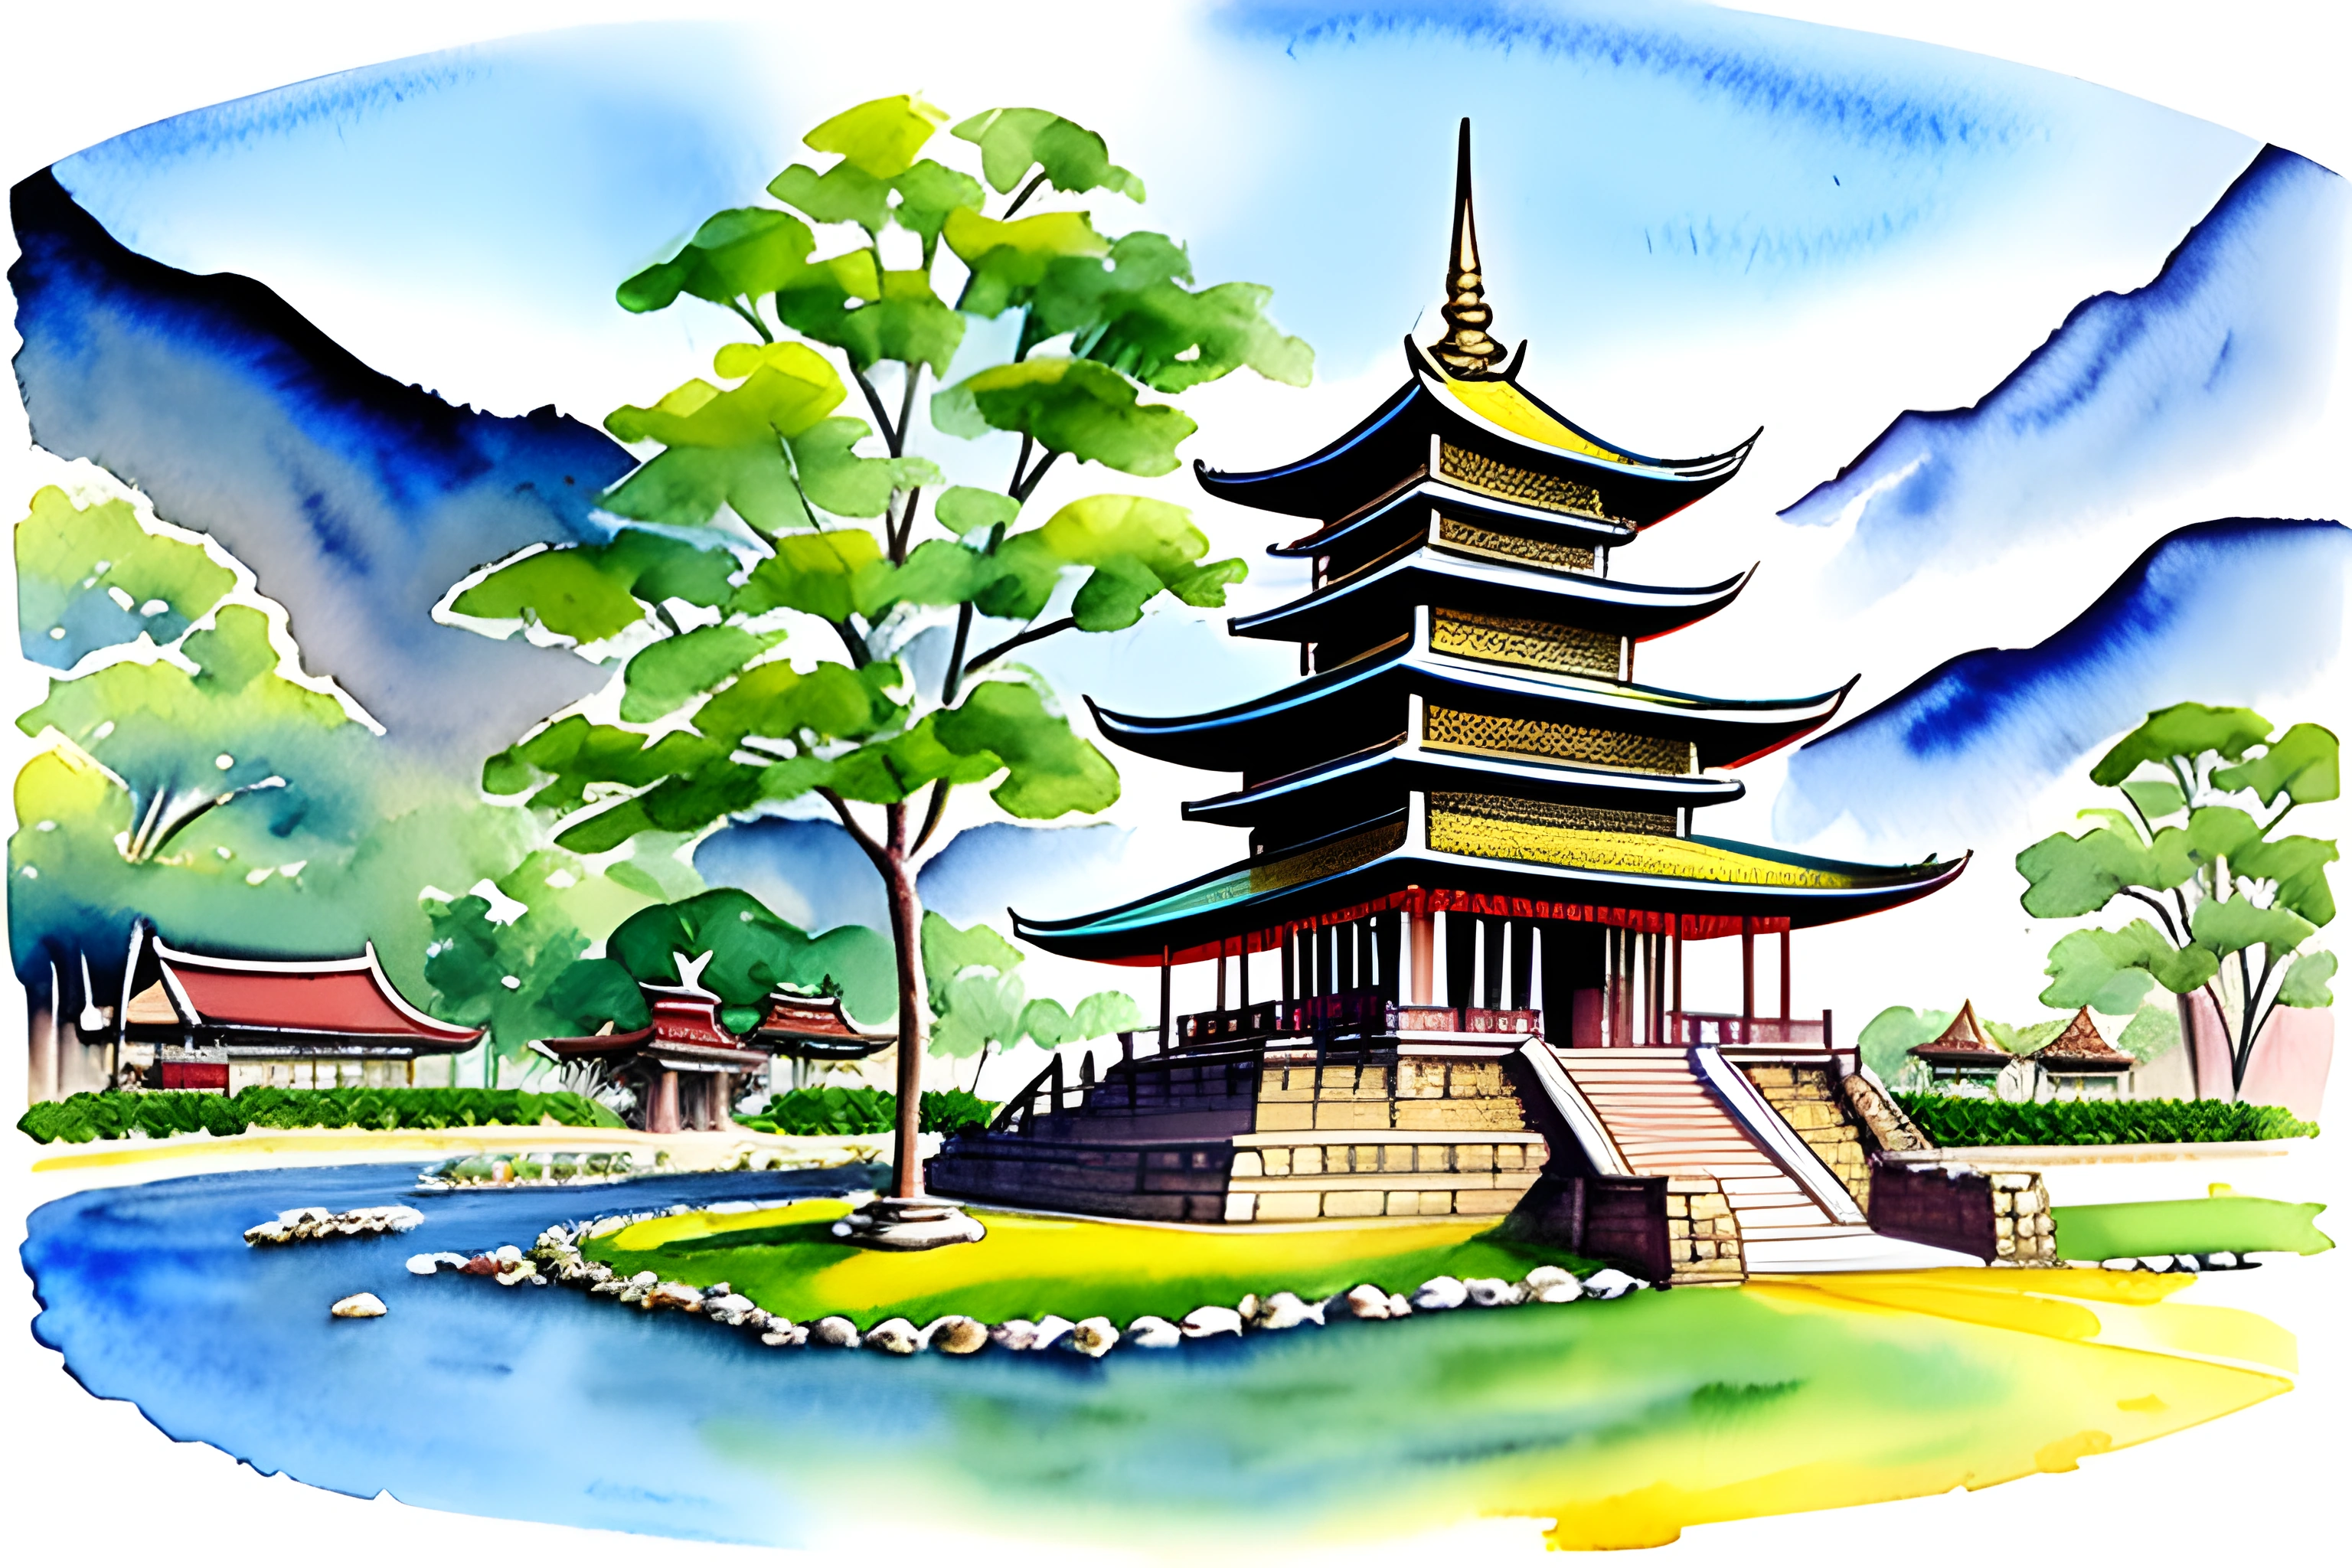 painting of a pagoda with a river and mountains in the background